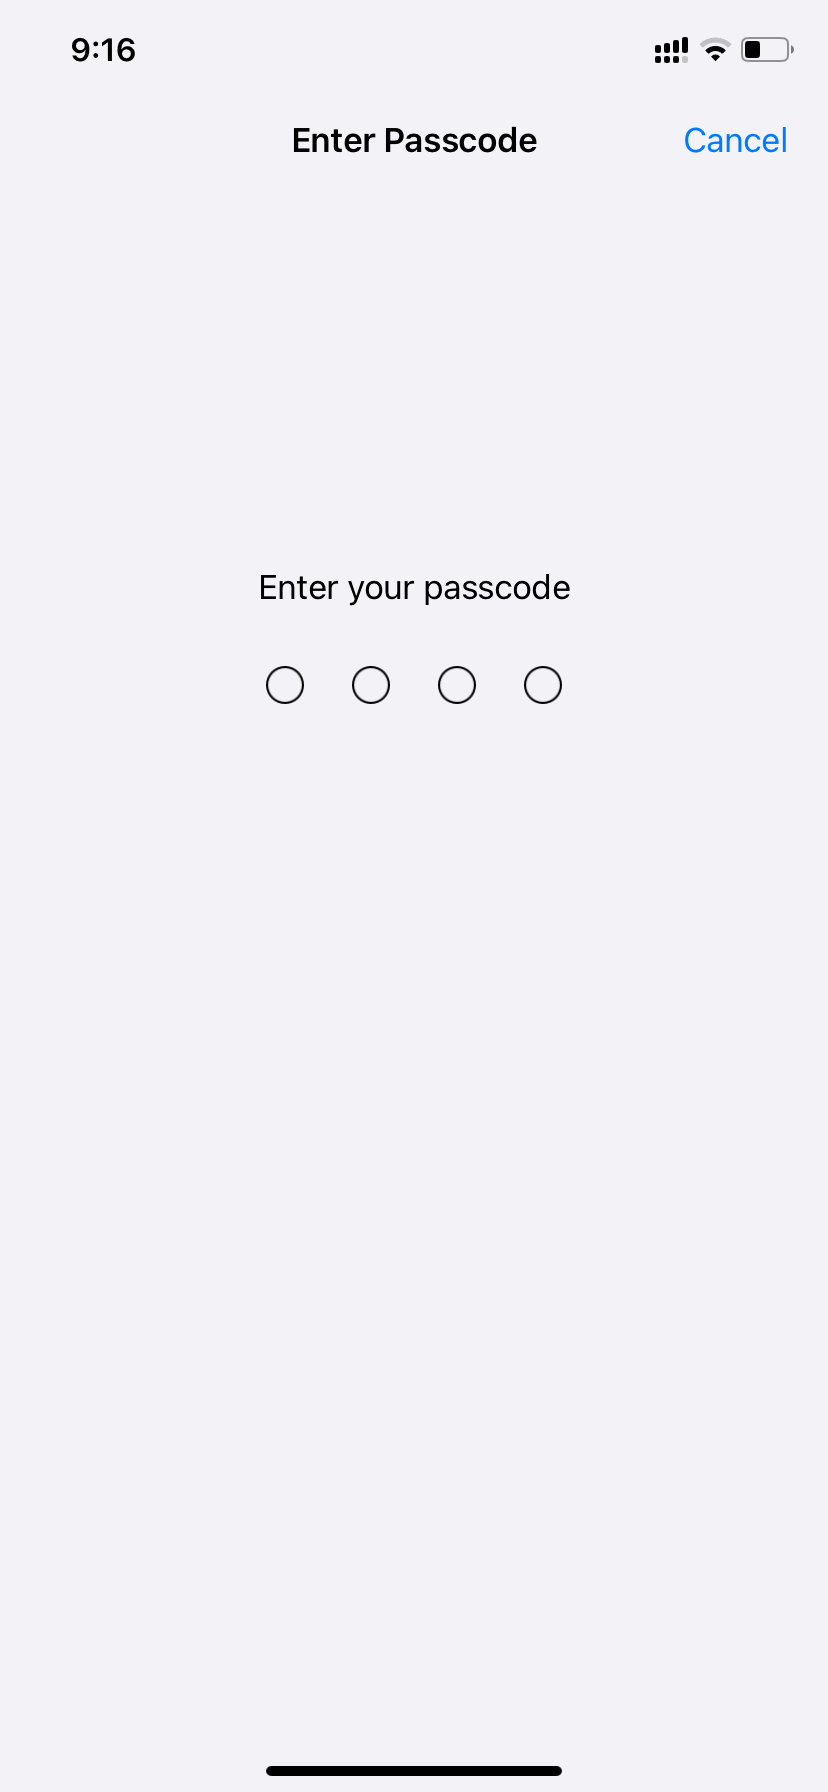 Finally-enter-your-passcode-to-confirm